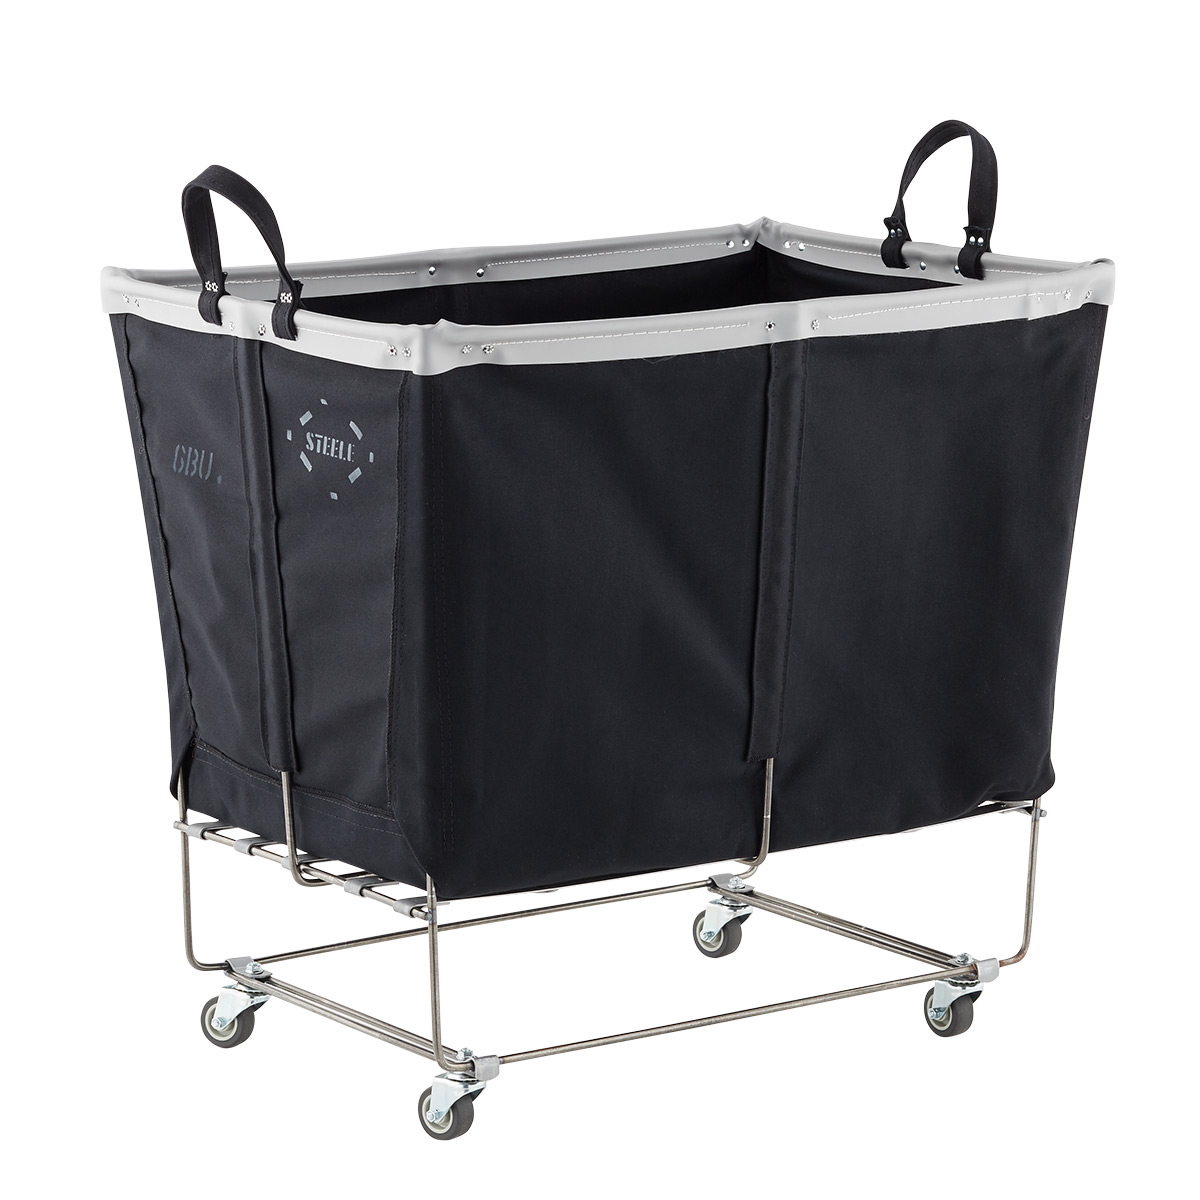 https://images.containerstore.com/catalogimages/393361/10082320-Steele-canvas-laundry-cart-.jpg